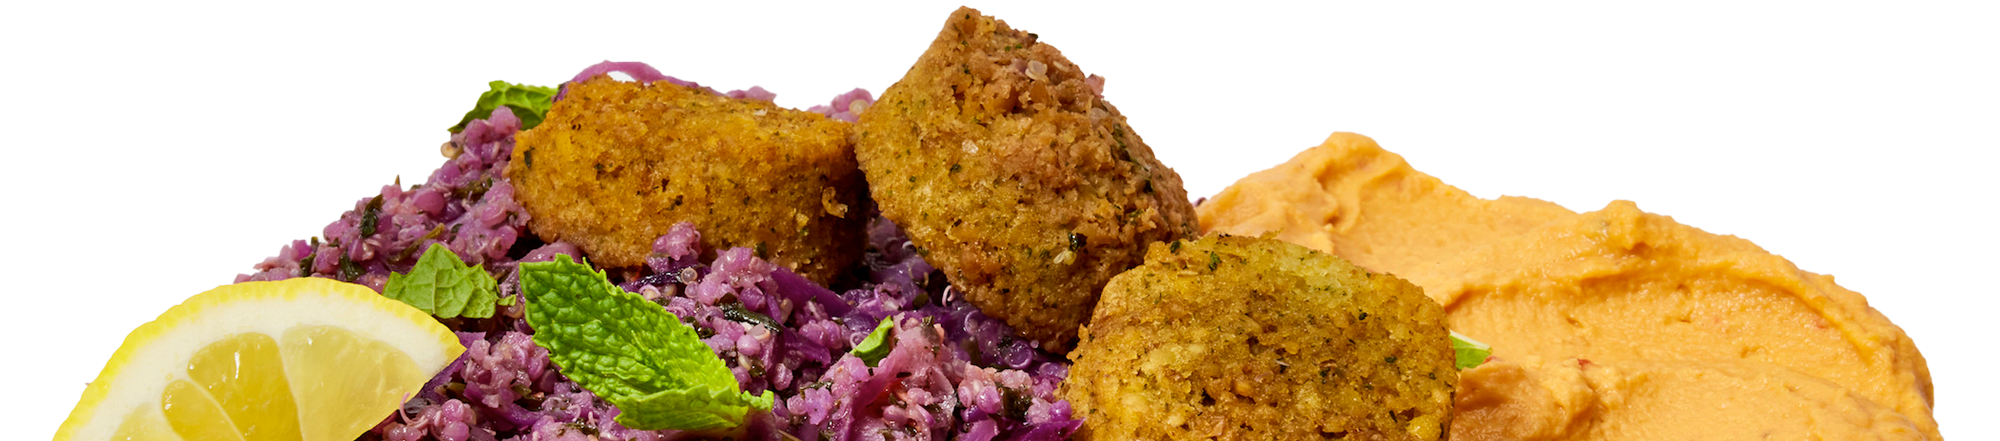 Three falafels seen in profile sitting on a bed of purple grains. To the right is mashed sweet potatoe, which are pale orange.